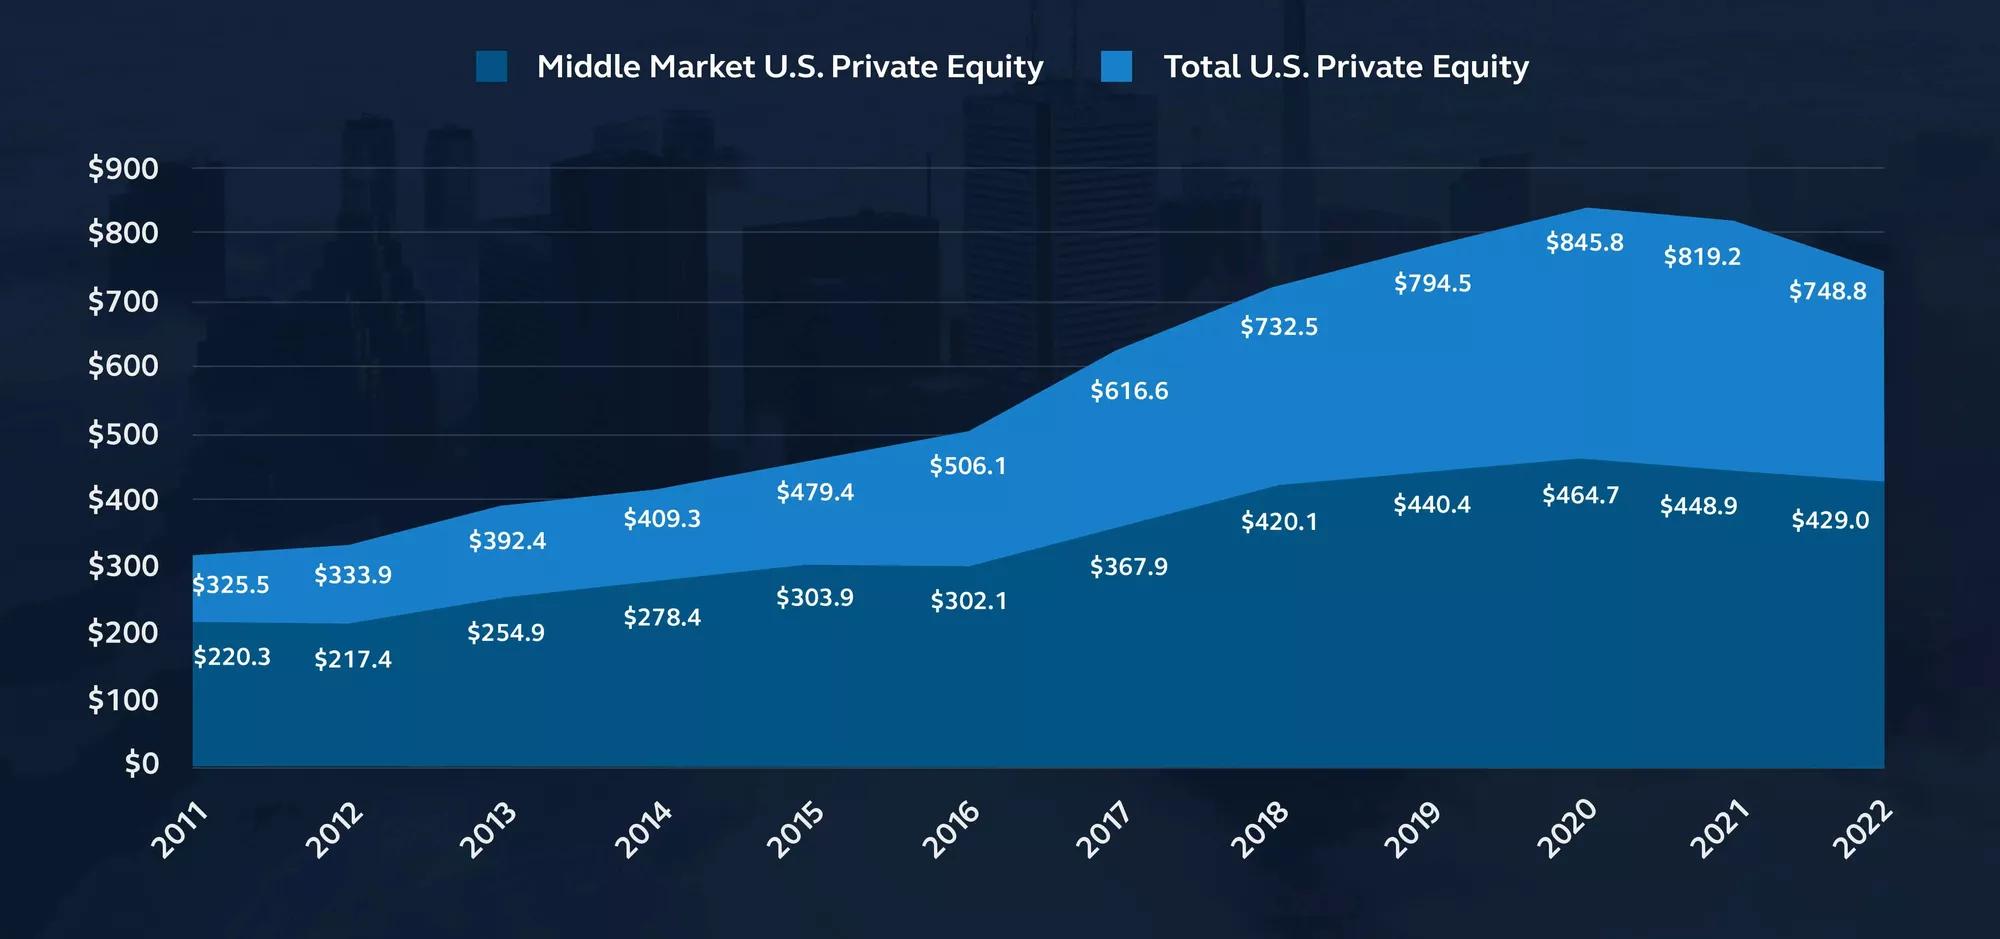 Middle Market U.S. Private Equity compared to Total U.S. Private Equity, 2012 to 2022